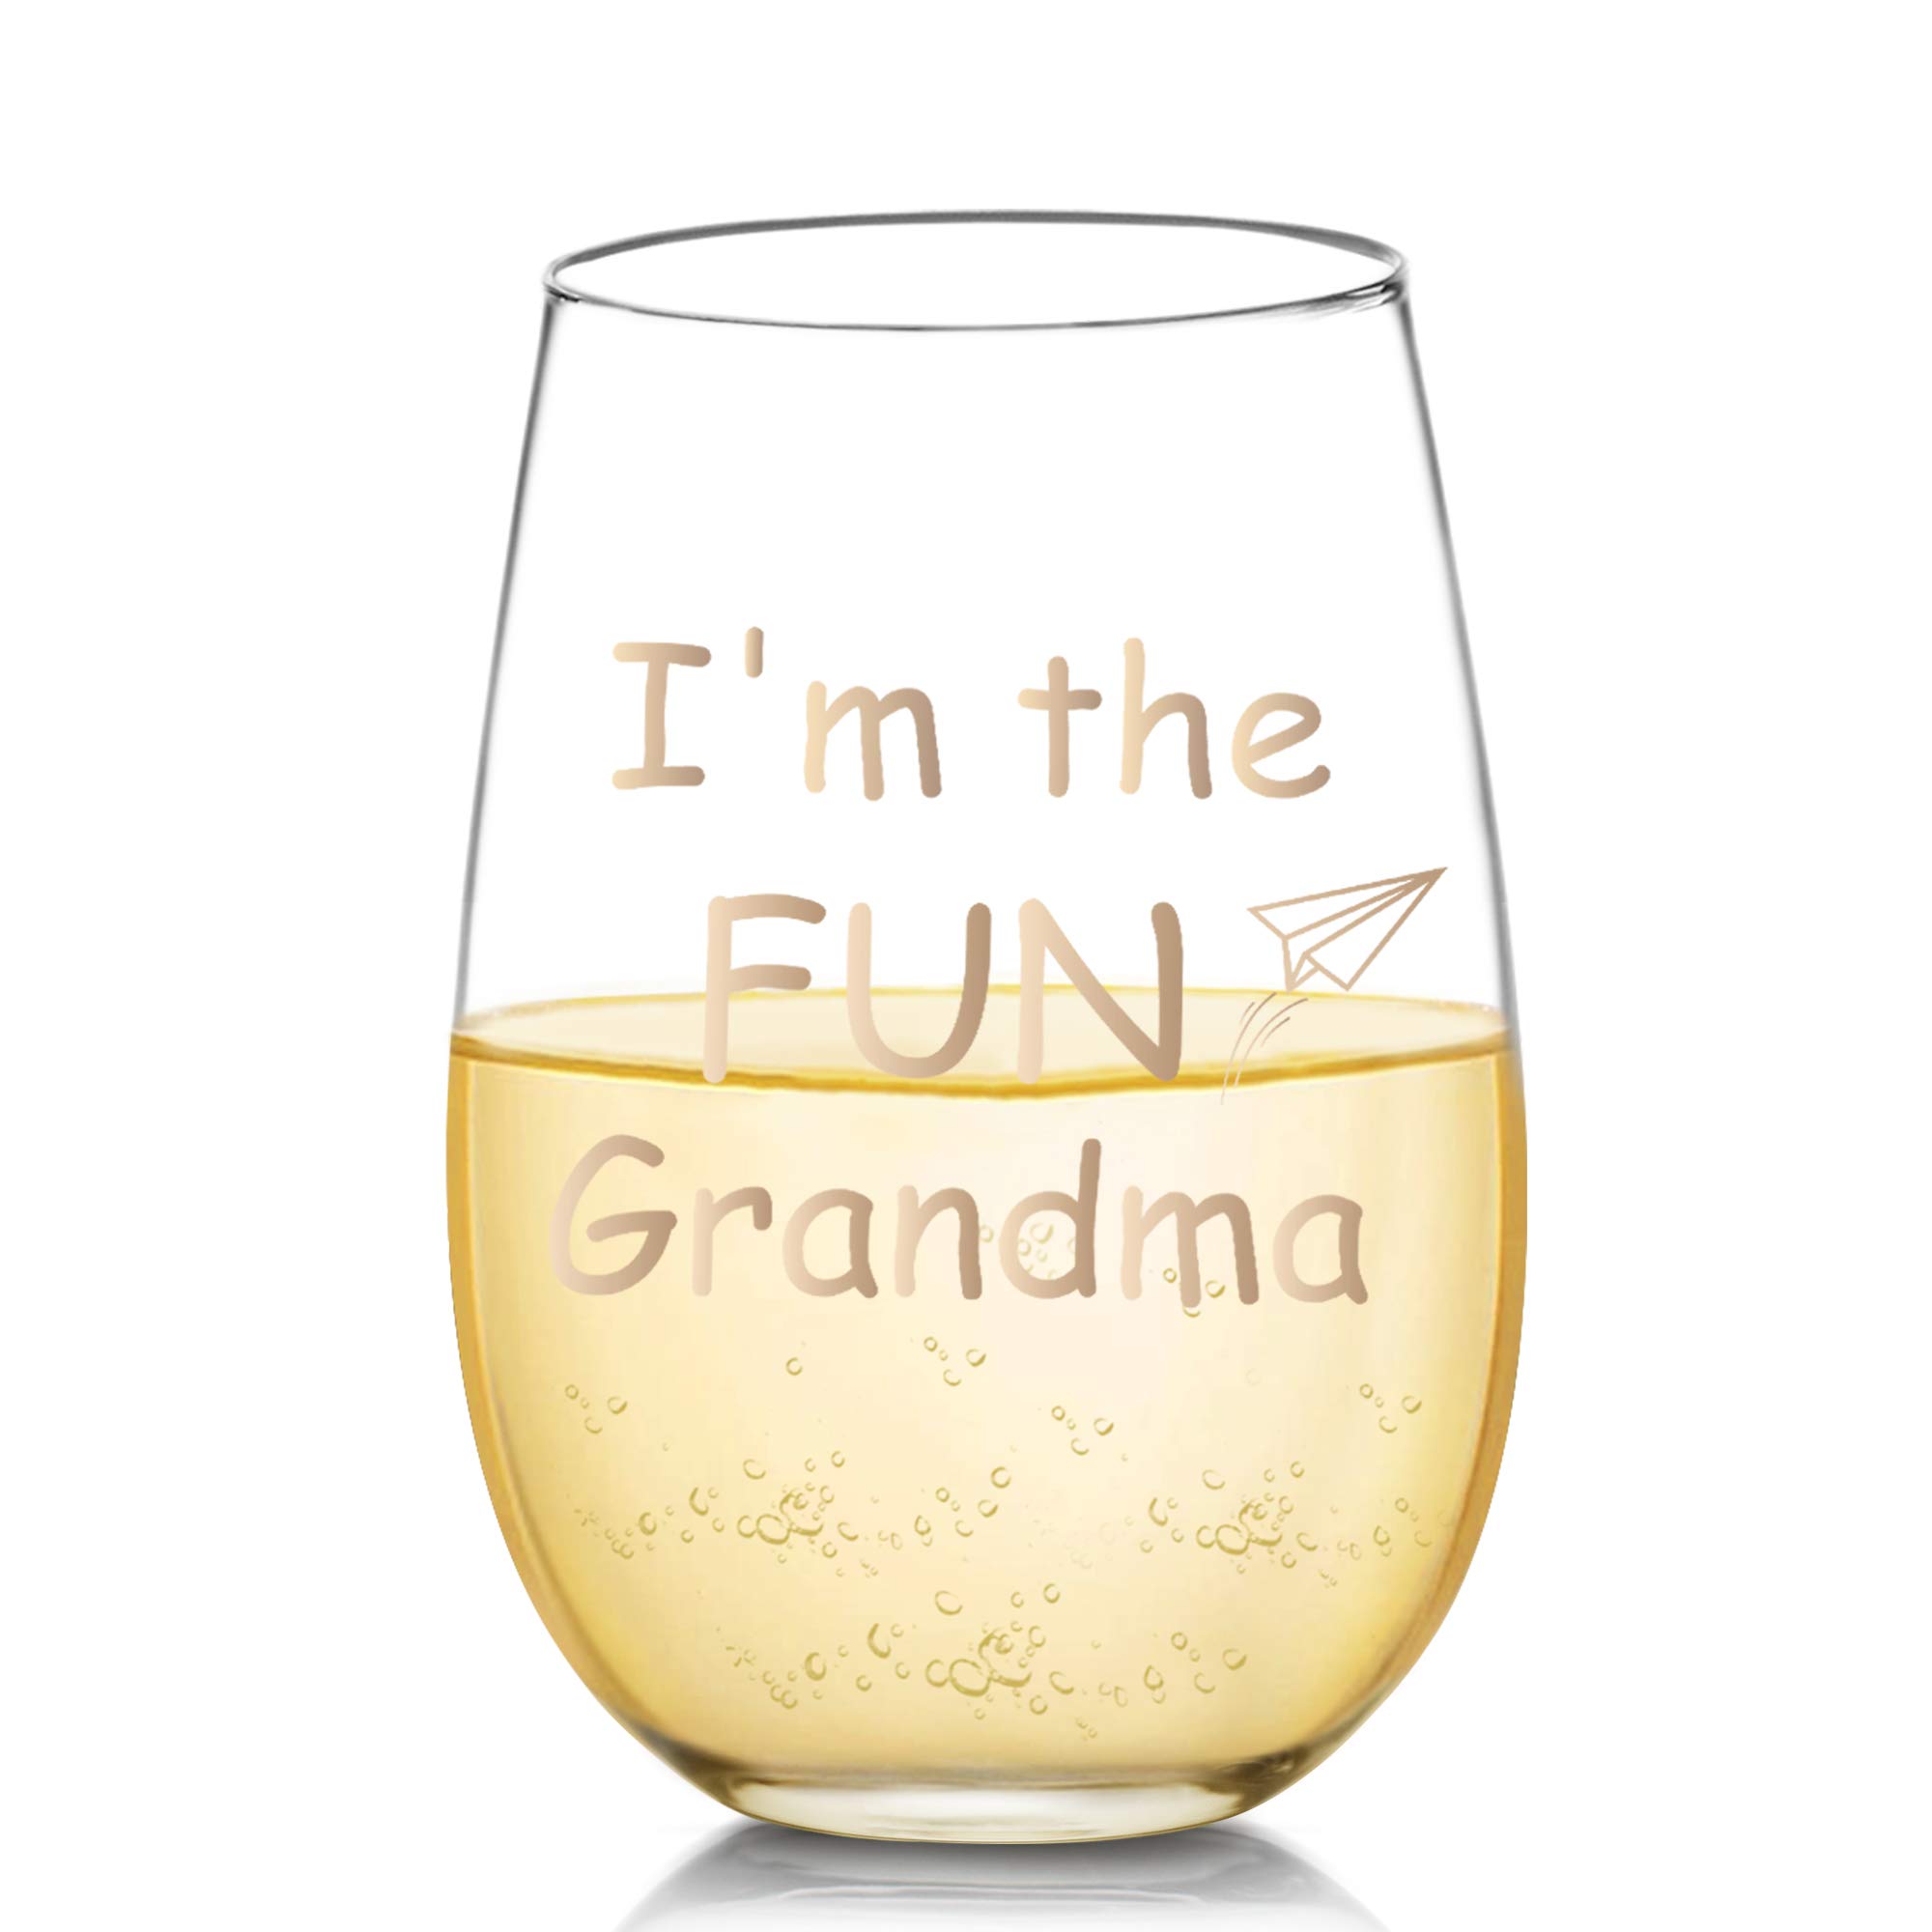 I'm the FUN Grandma Funny Wine Glass Gifts for Grandma - Novelty Birthday, Mothers Day Gifts for Grandma, Women, Unique Grandma Gifts from Grandchildren, 17 oz Wine Glasses